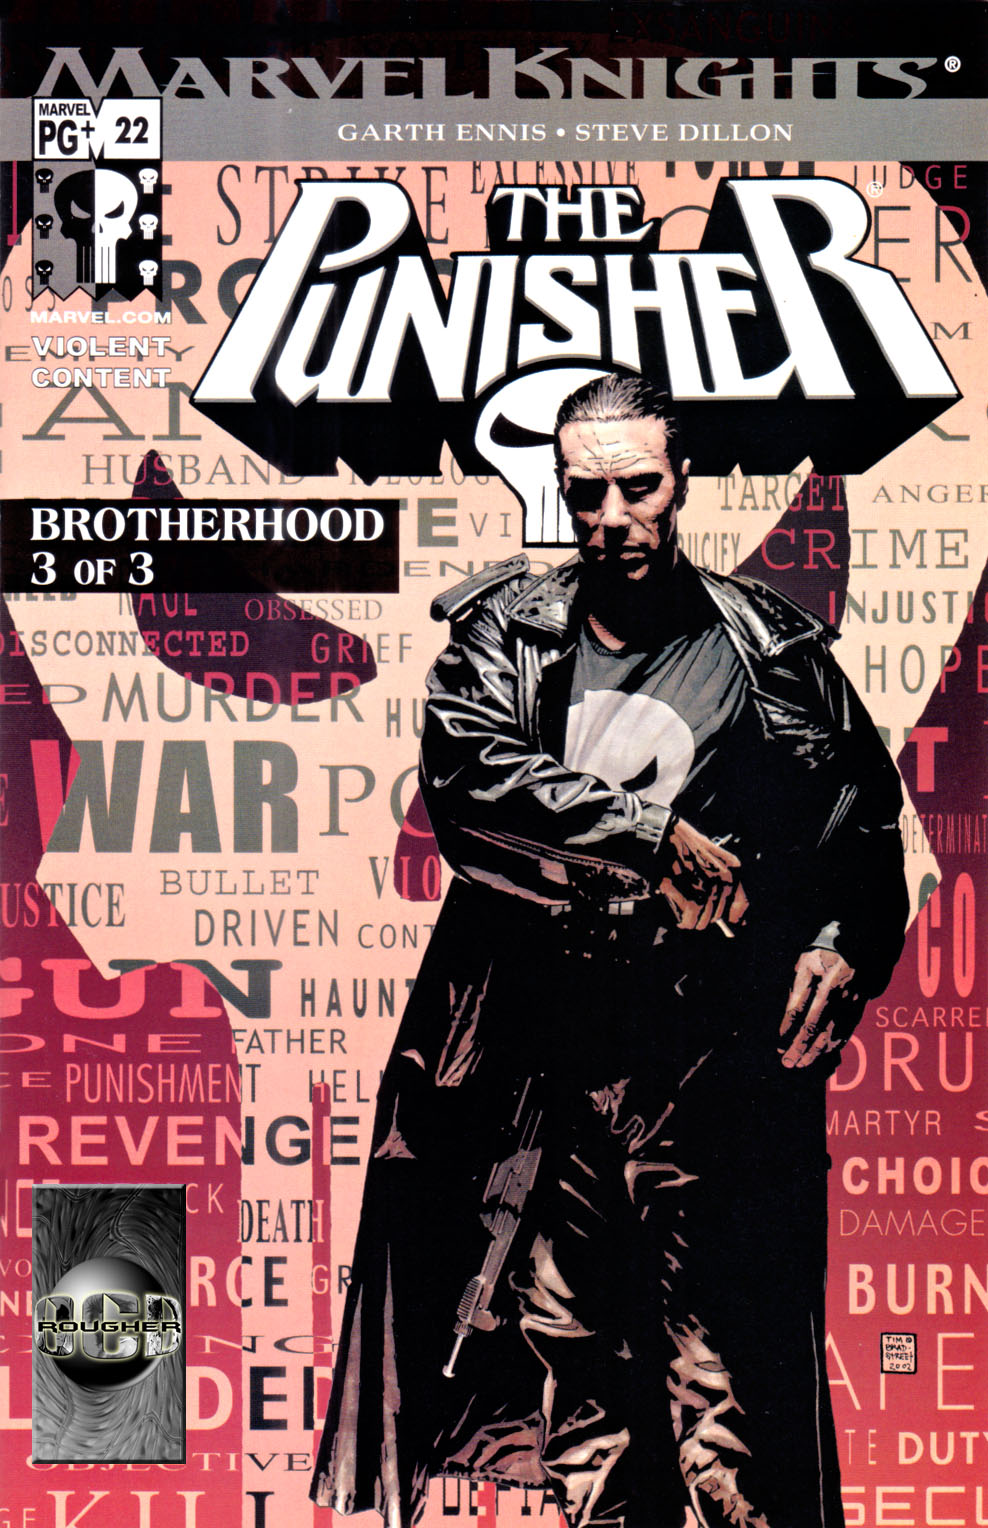 The Punisher (2001) issue 22 - Brotherhood #03 - Page 1